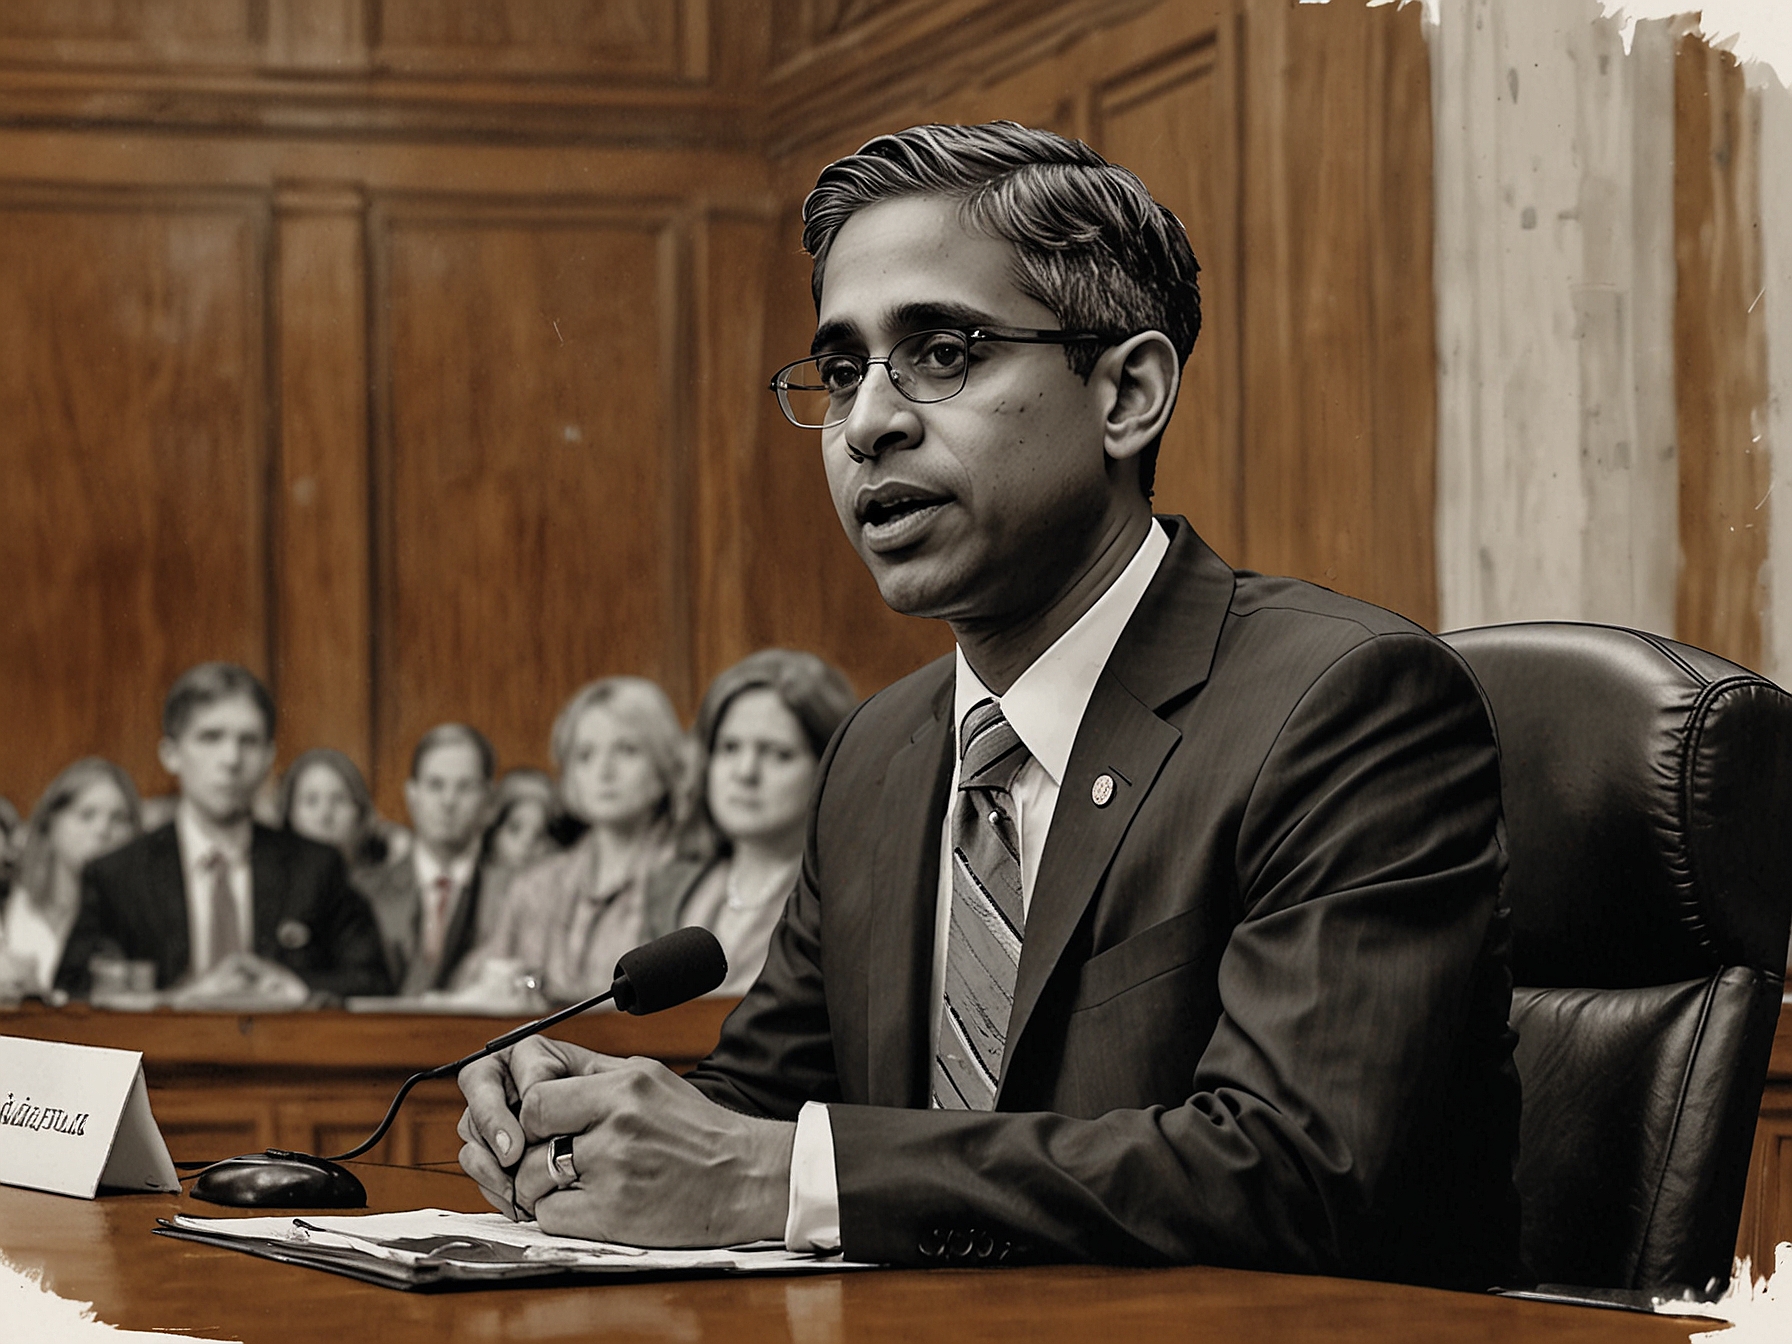 Dr. Vivek Murthy addresses a congressional hearing, emphasizing the need for mandatory warning labels on social media to protect mental health, particularly among adolescents and young adults.